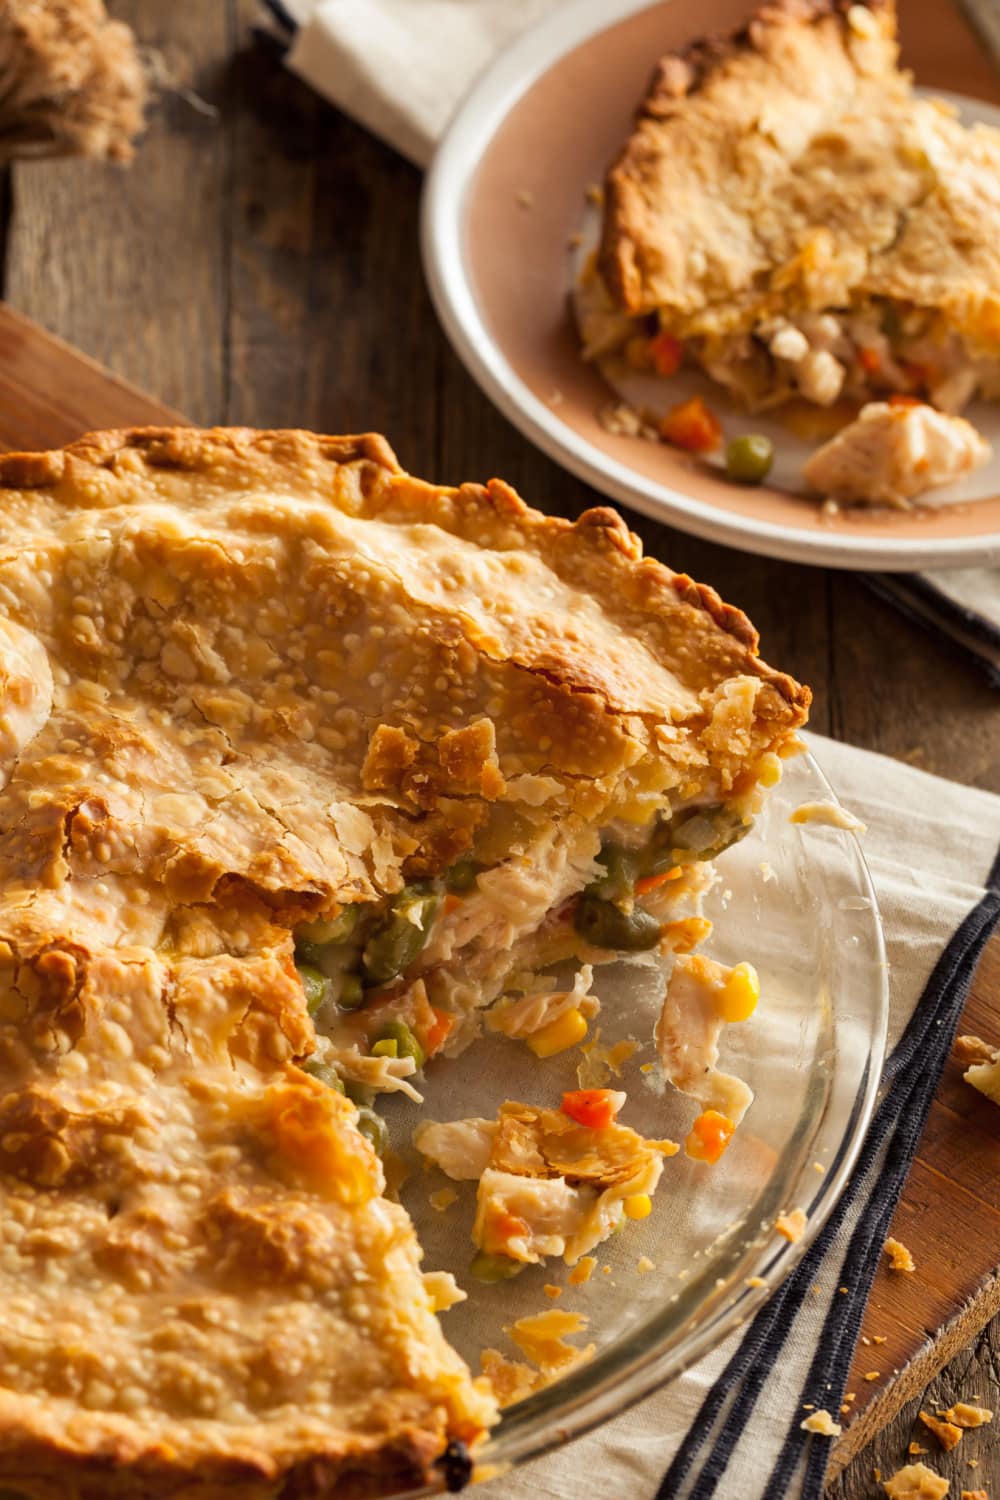 Bisquick Chicken Pot Pie With A Golden Crust, Filled With Chicken, Vegetables, And A Side Of Corn